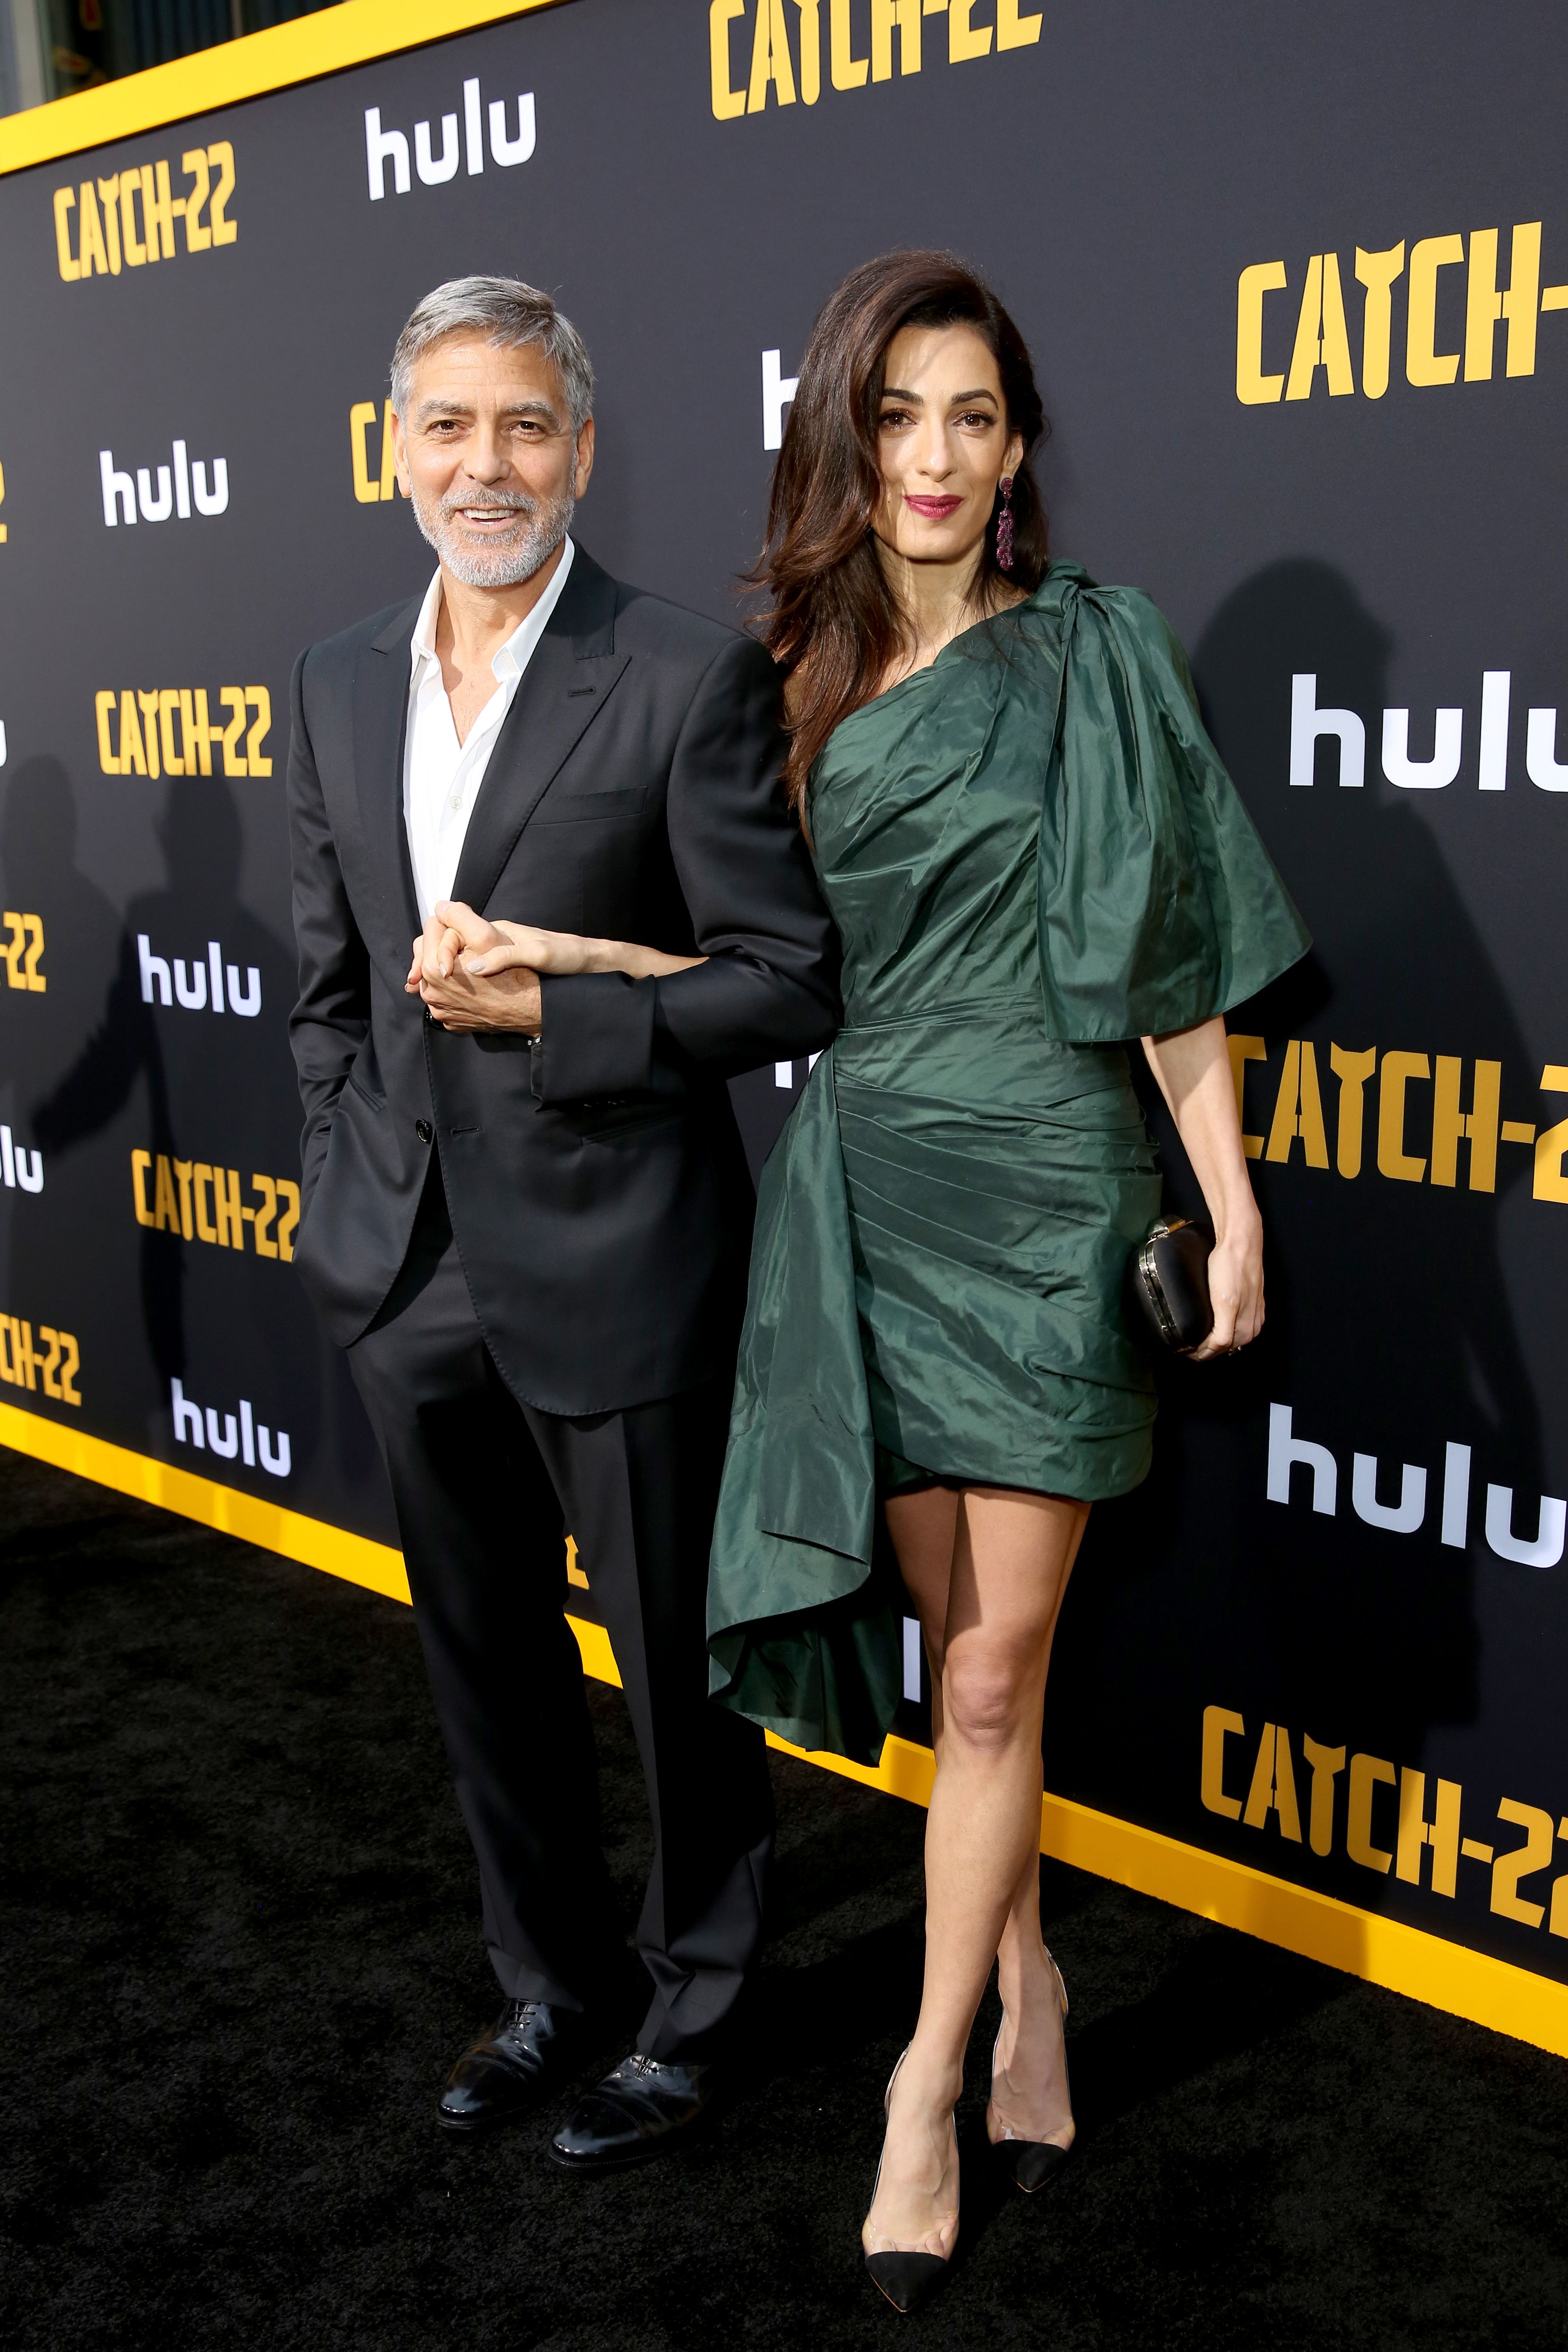 Amal Clooney's Style File